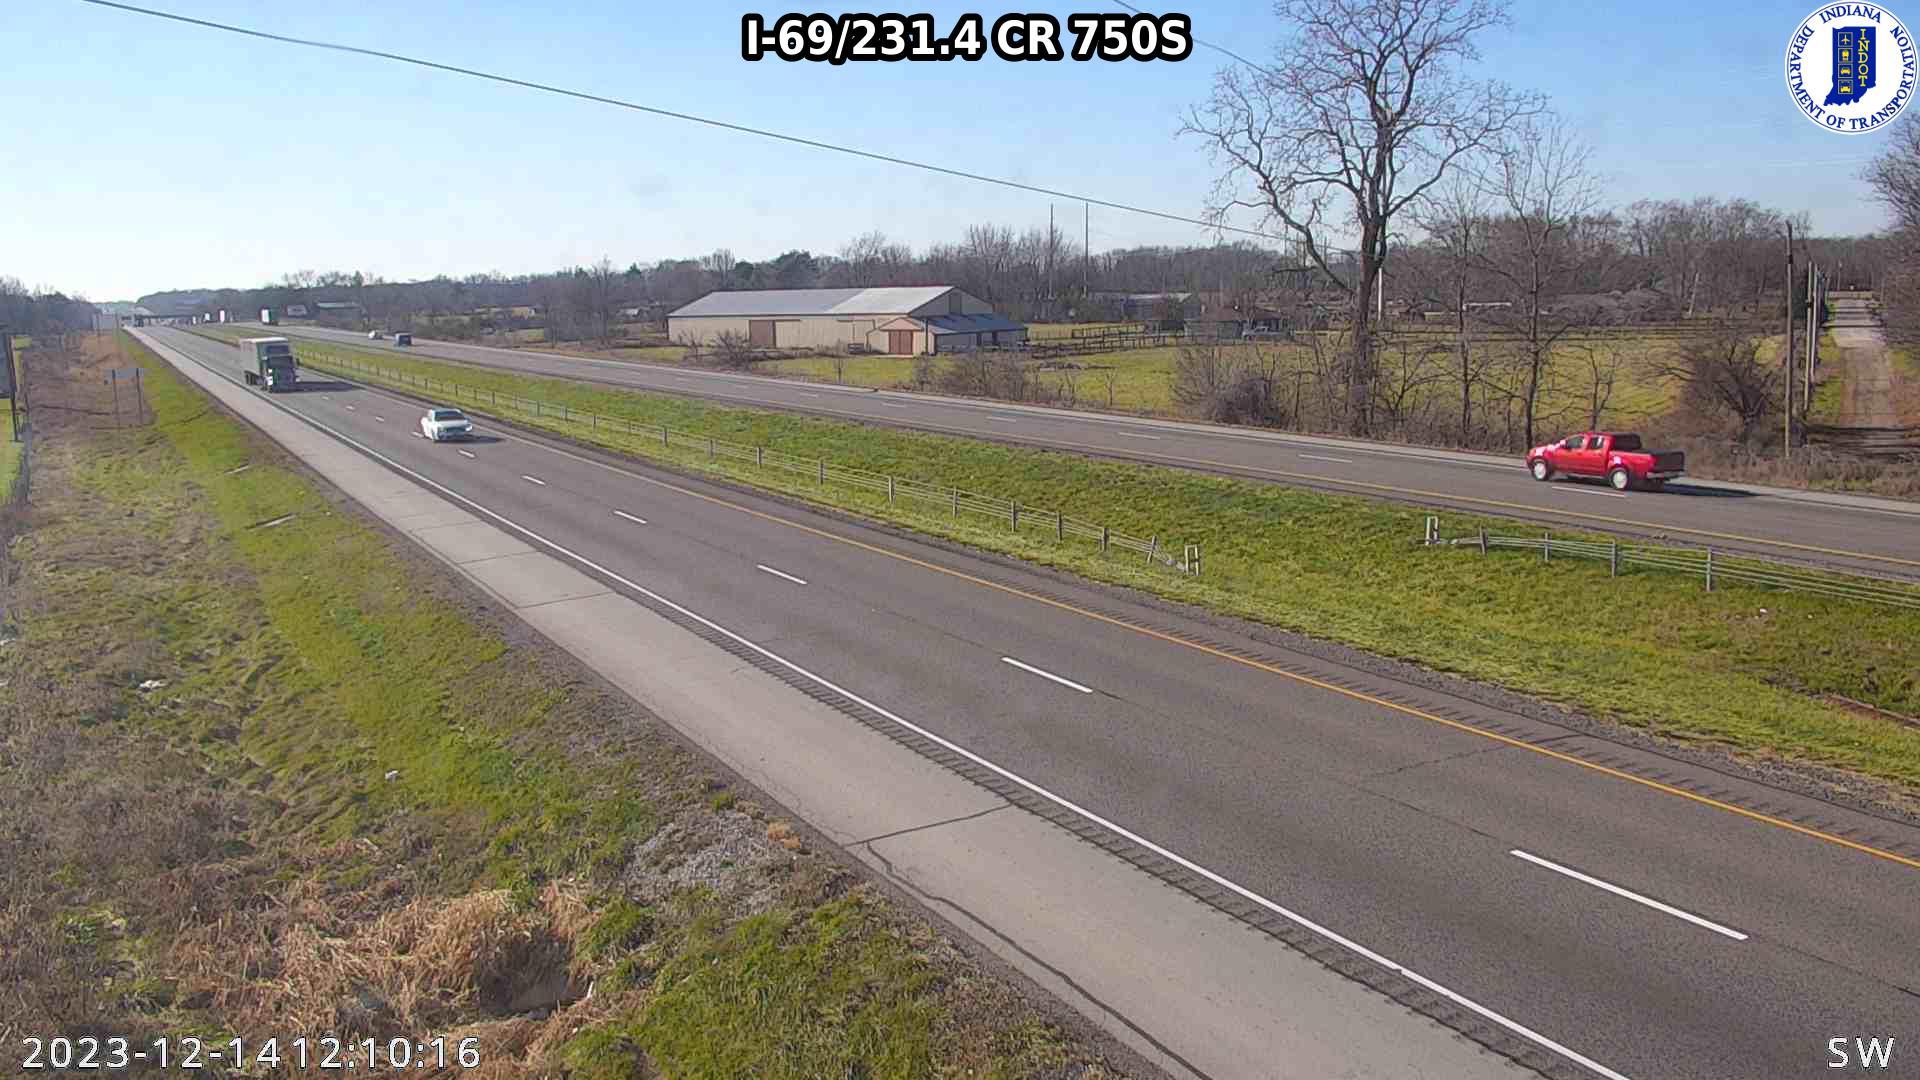 Traffic Cam Chesterfield: I-69: I-69/231.4 CR 750S Player